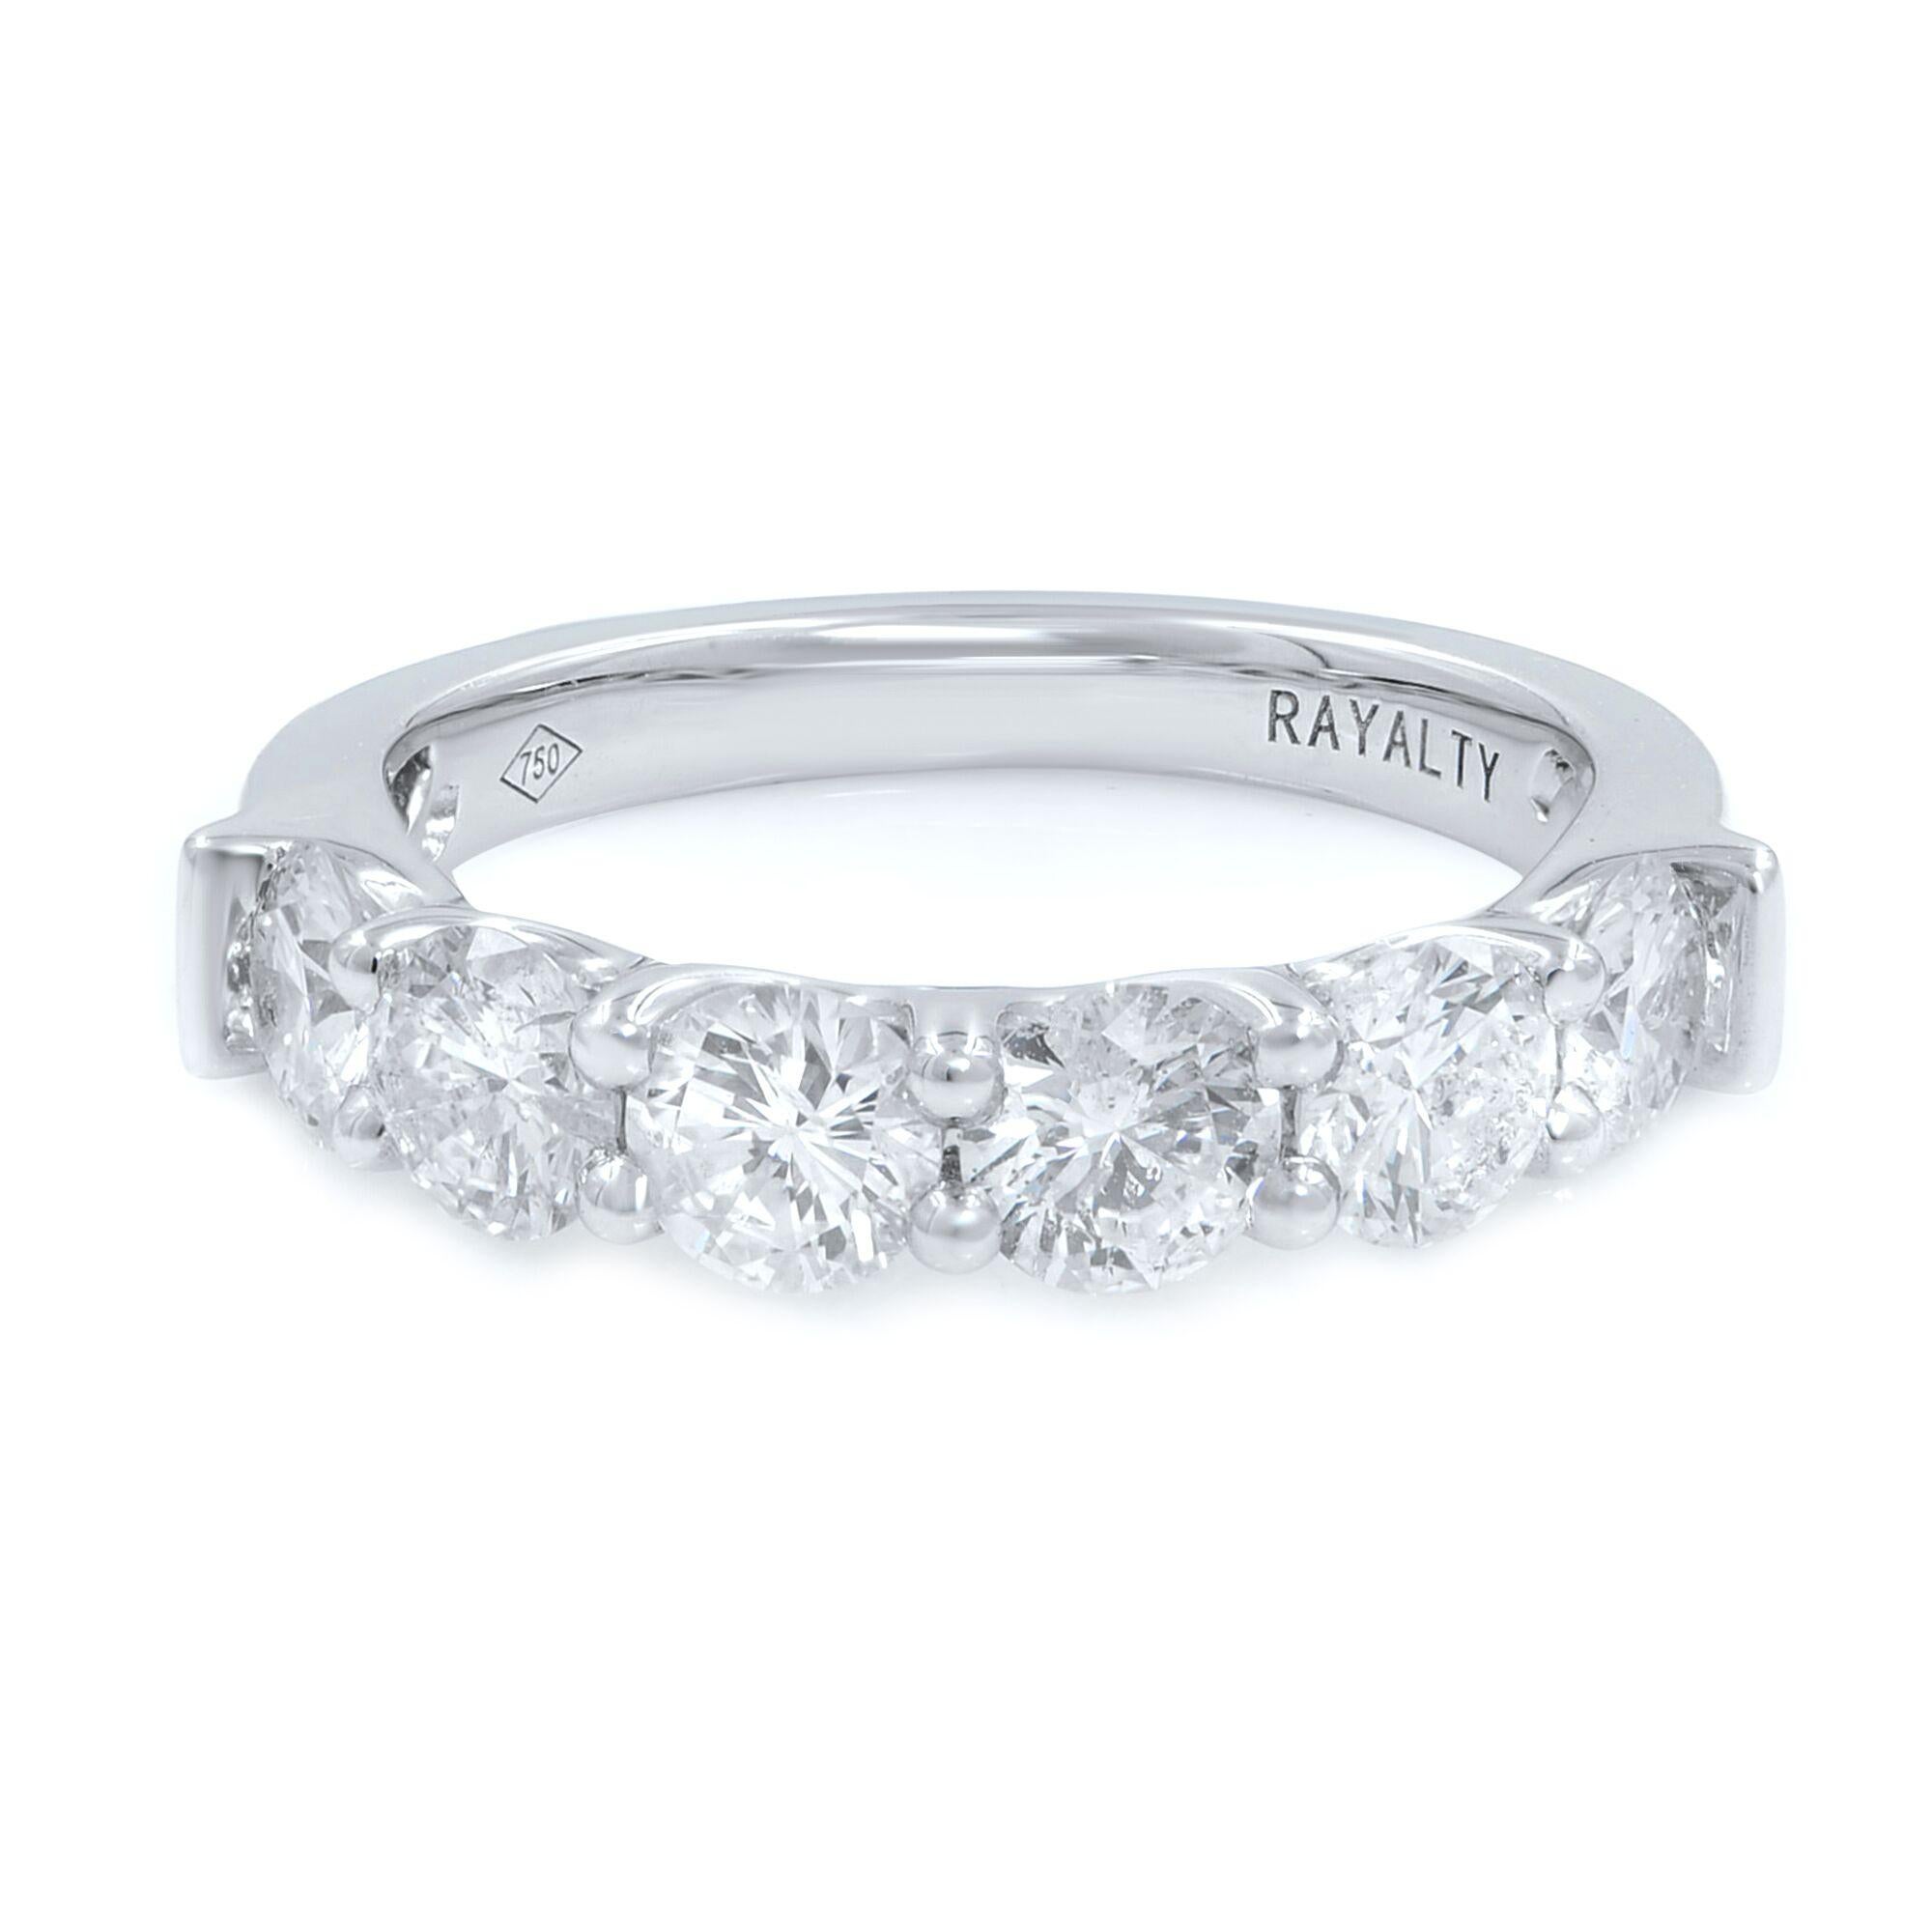 Six stone diamond eternity band crafted in 18k white gold mounted with beautiful white round brilliant cut diamonds of 1.82cts total weight. Best ring for any milestone or celebration. 
Size: 7
Weight: 4.1